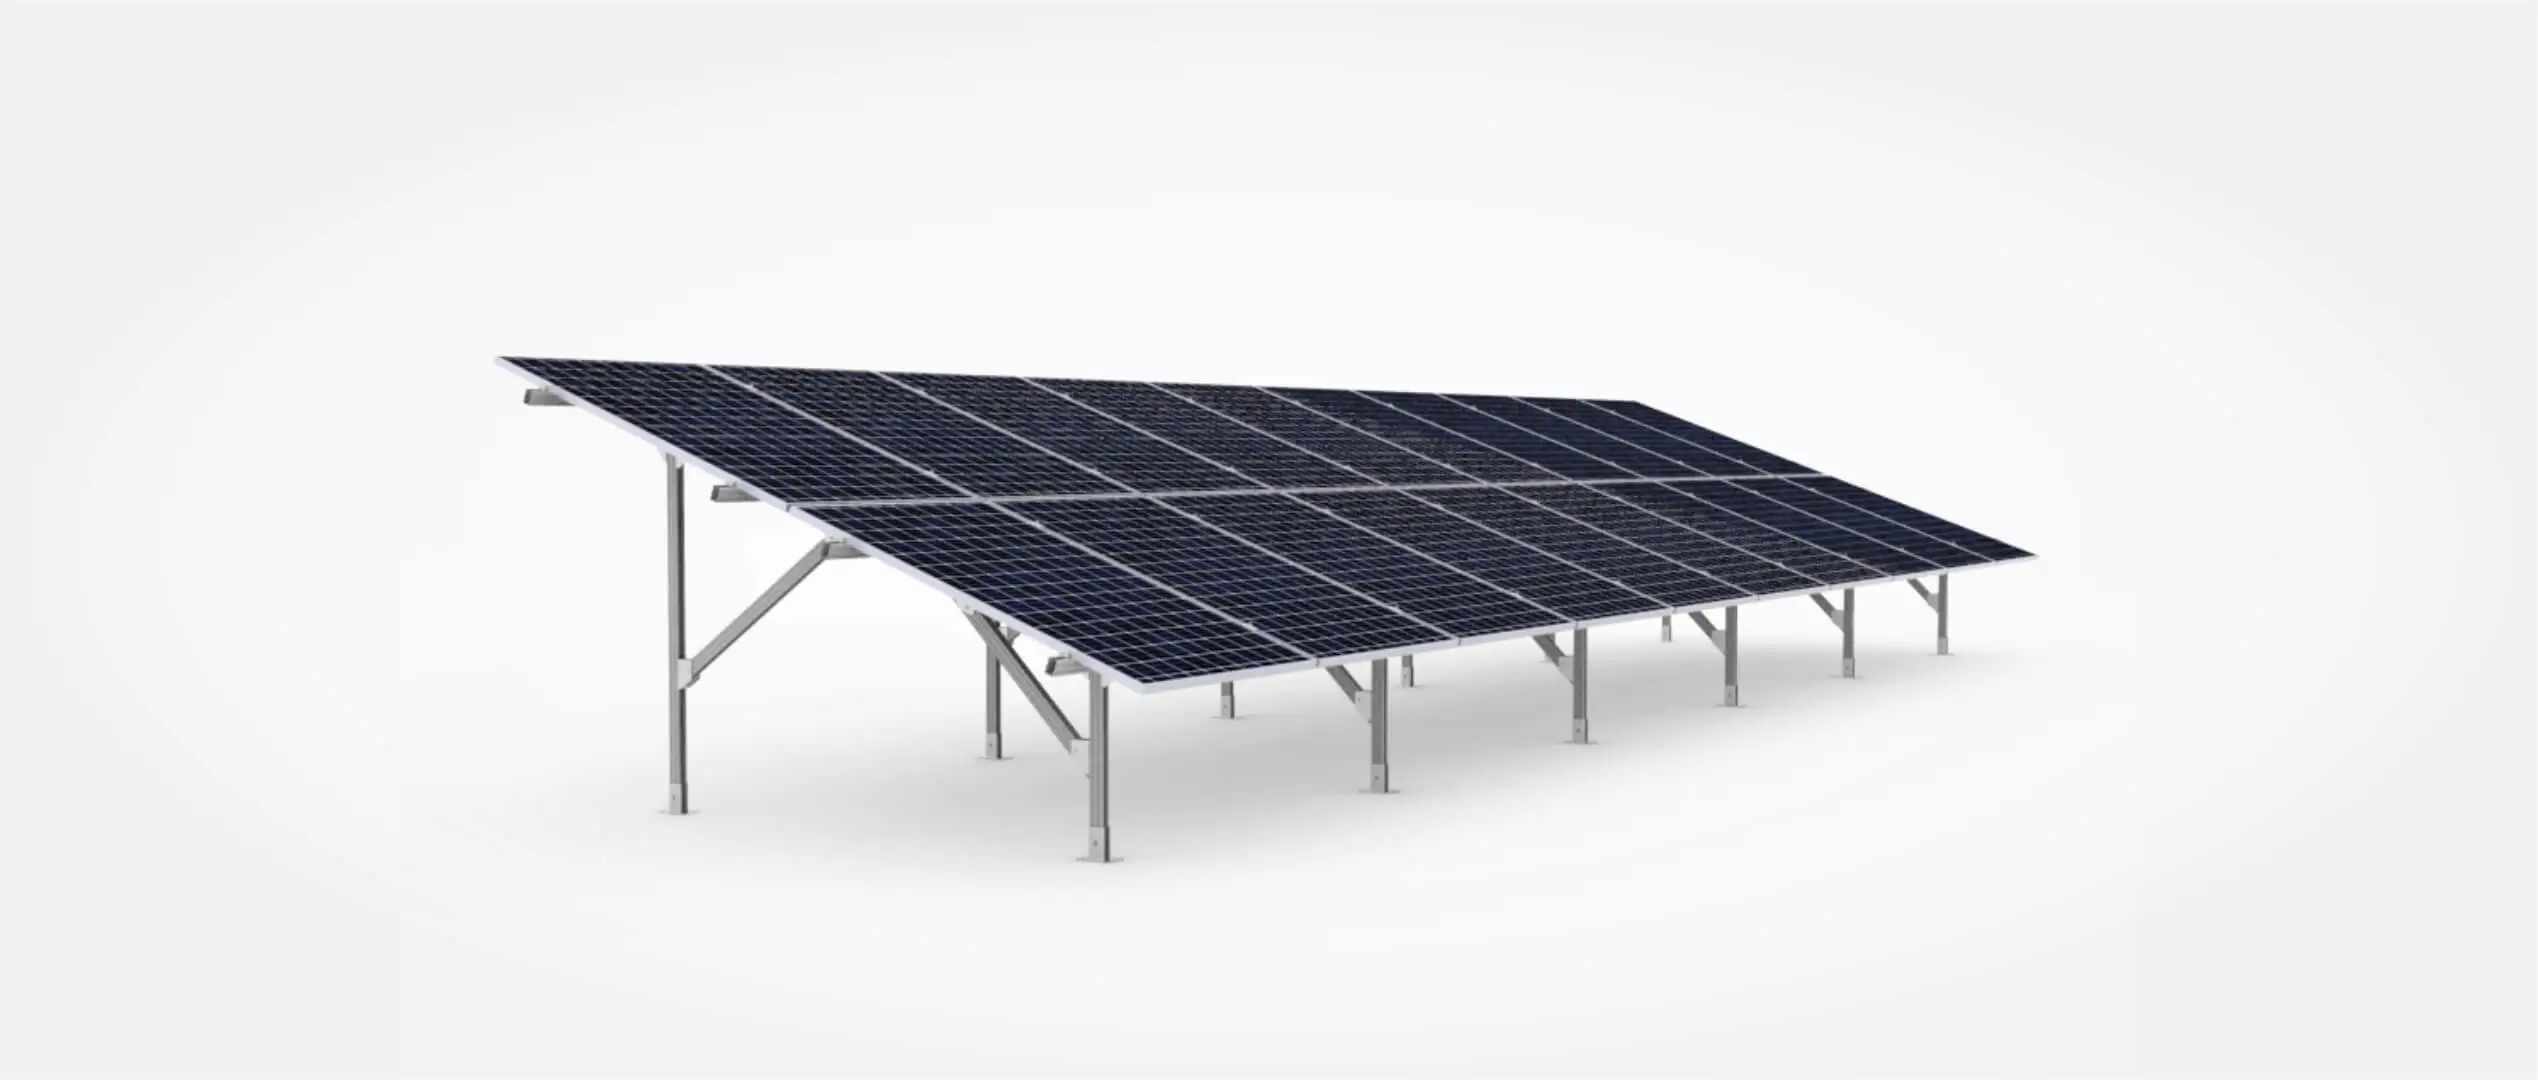 Roof Mounted Solar Structures